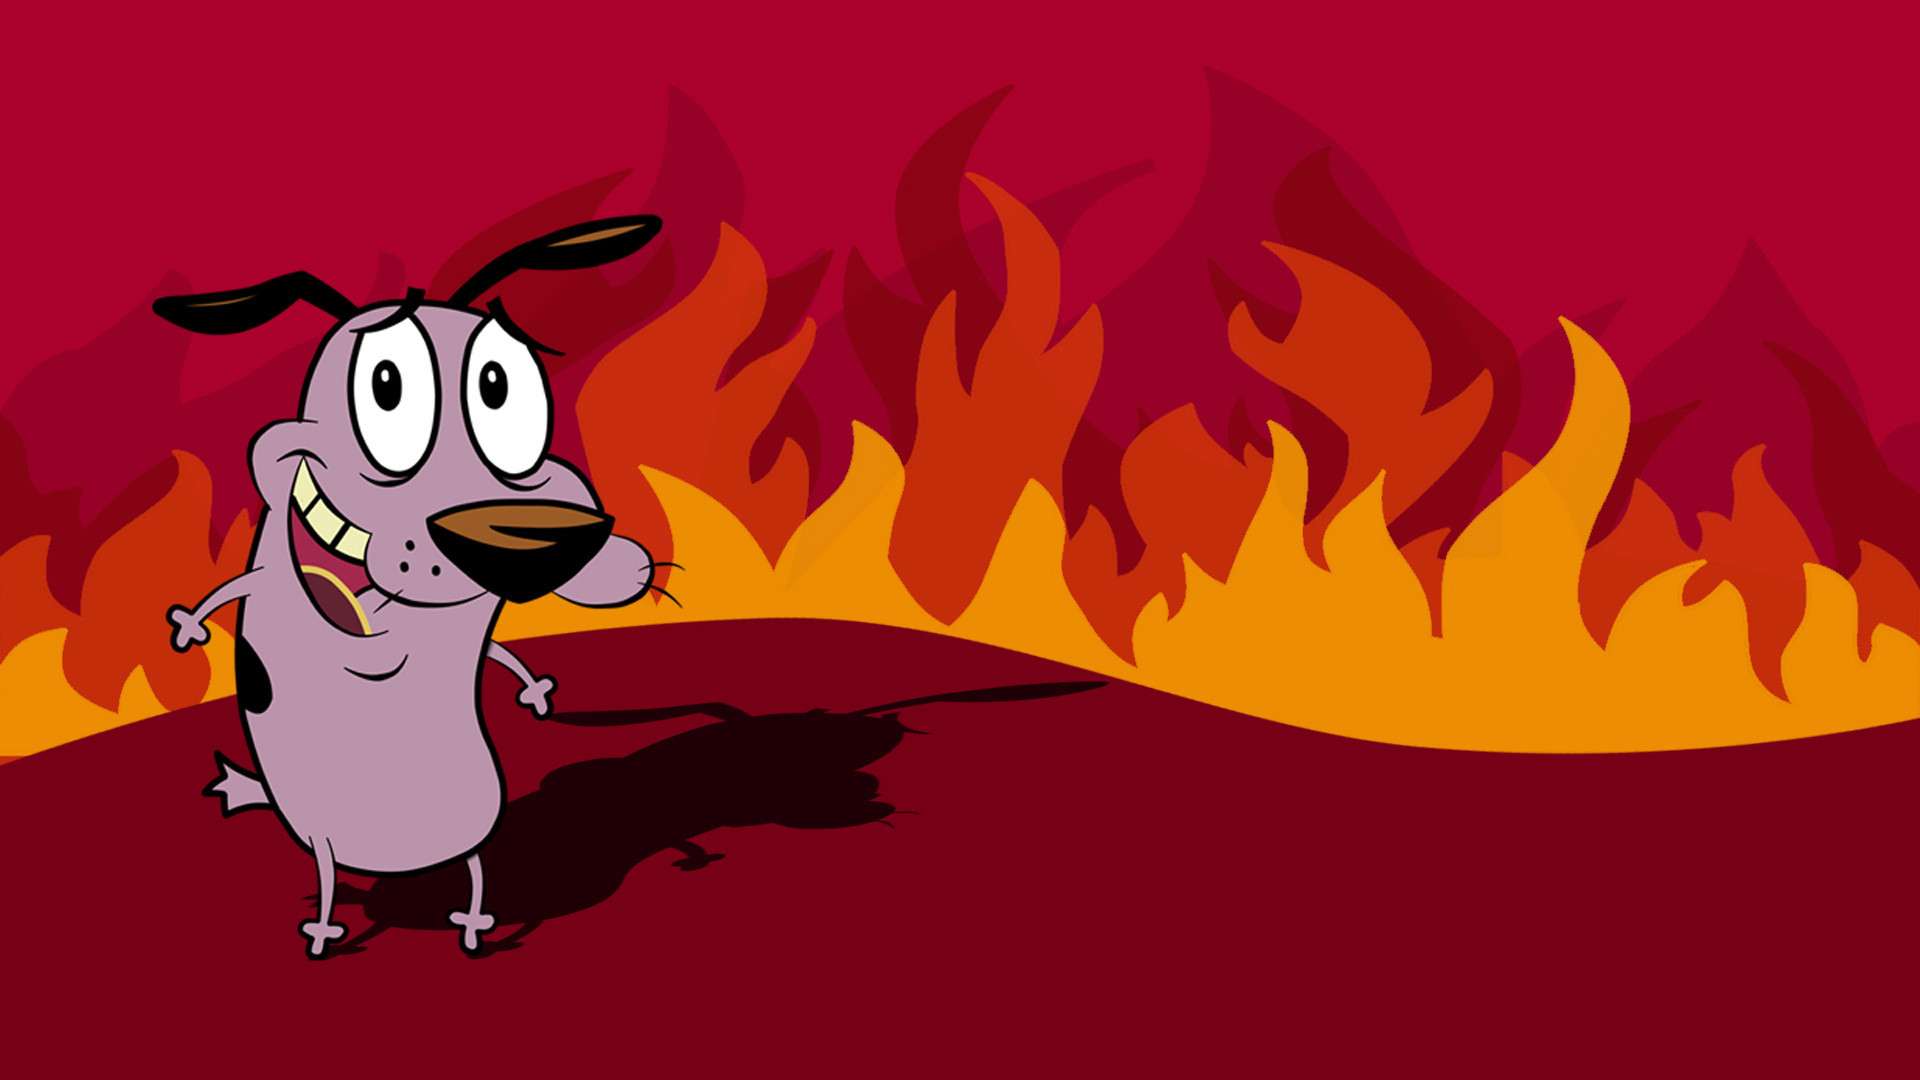 HD Courage The Cowardly Dog Wallpaper